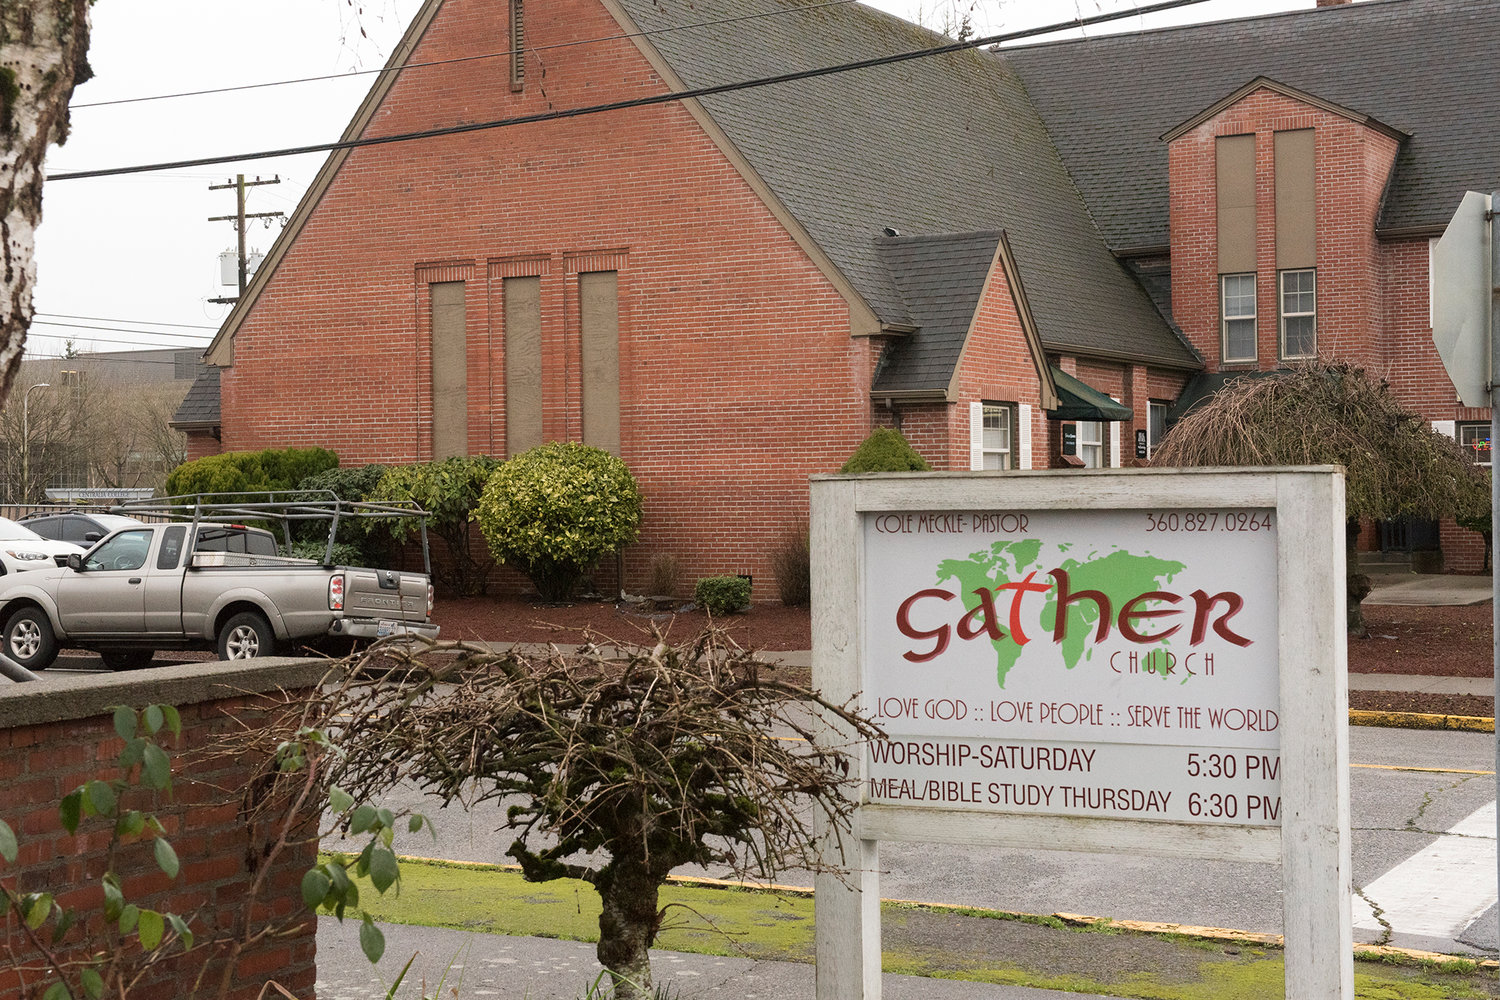 The socks donated through Warm Hearts and Feet are distrubuted to the community by Gather Church